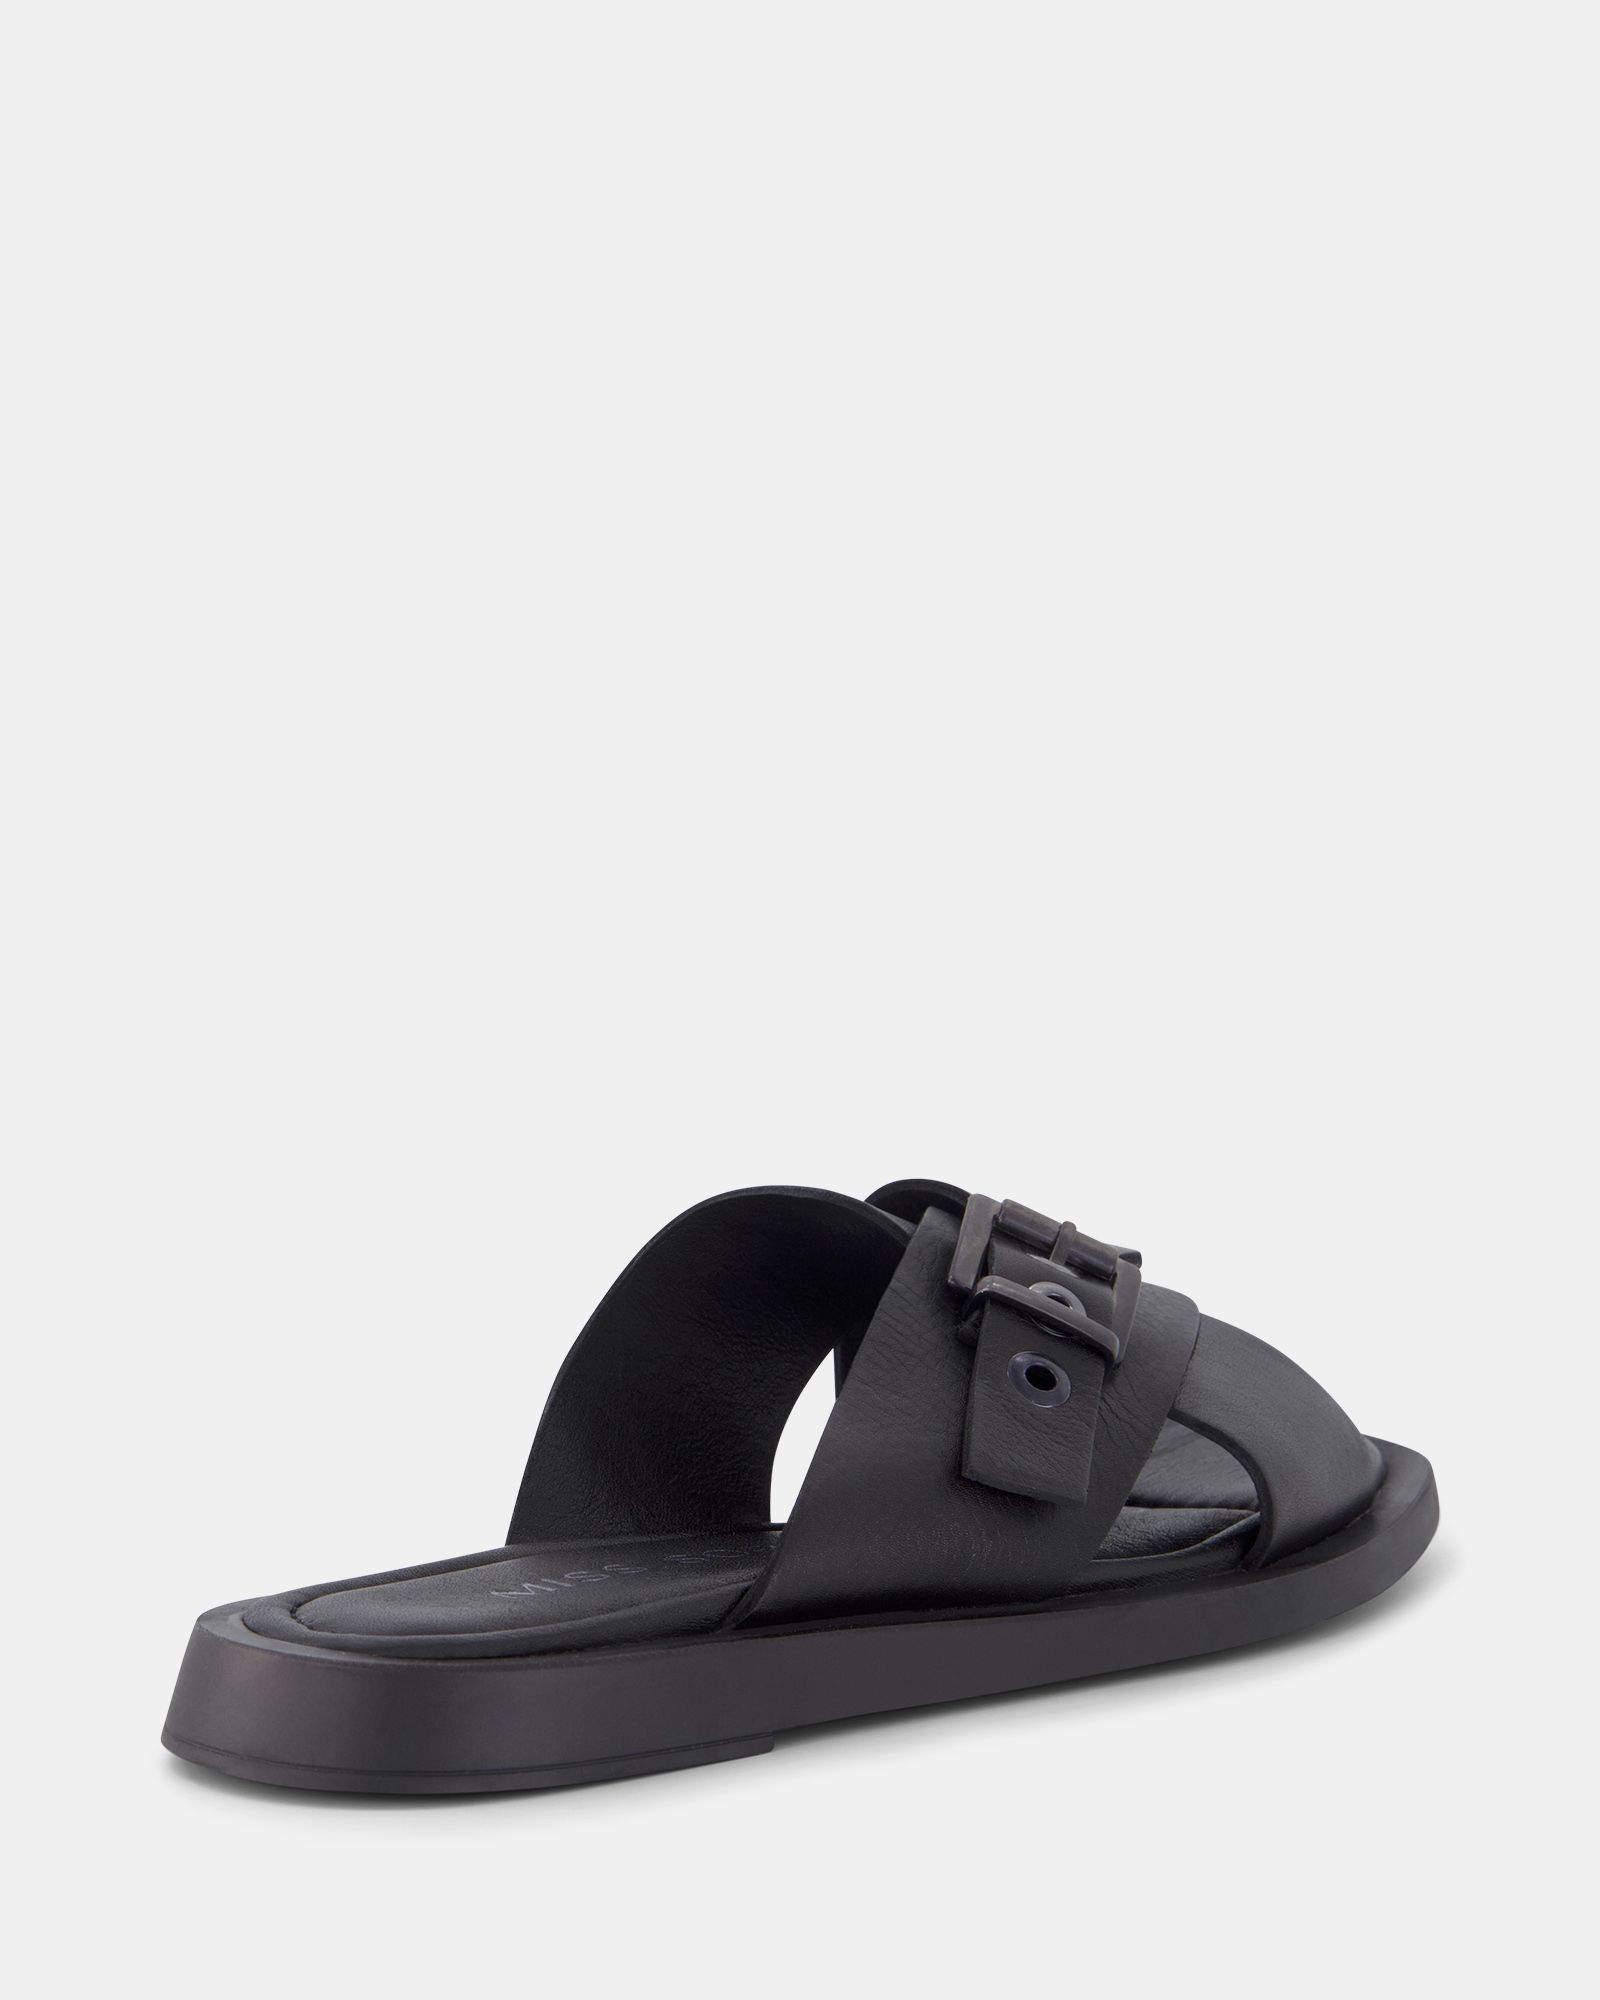 Buy CYBILL Black sandals Online at Shoe Connection